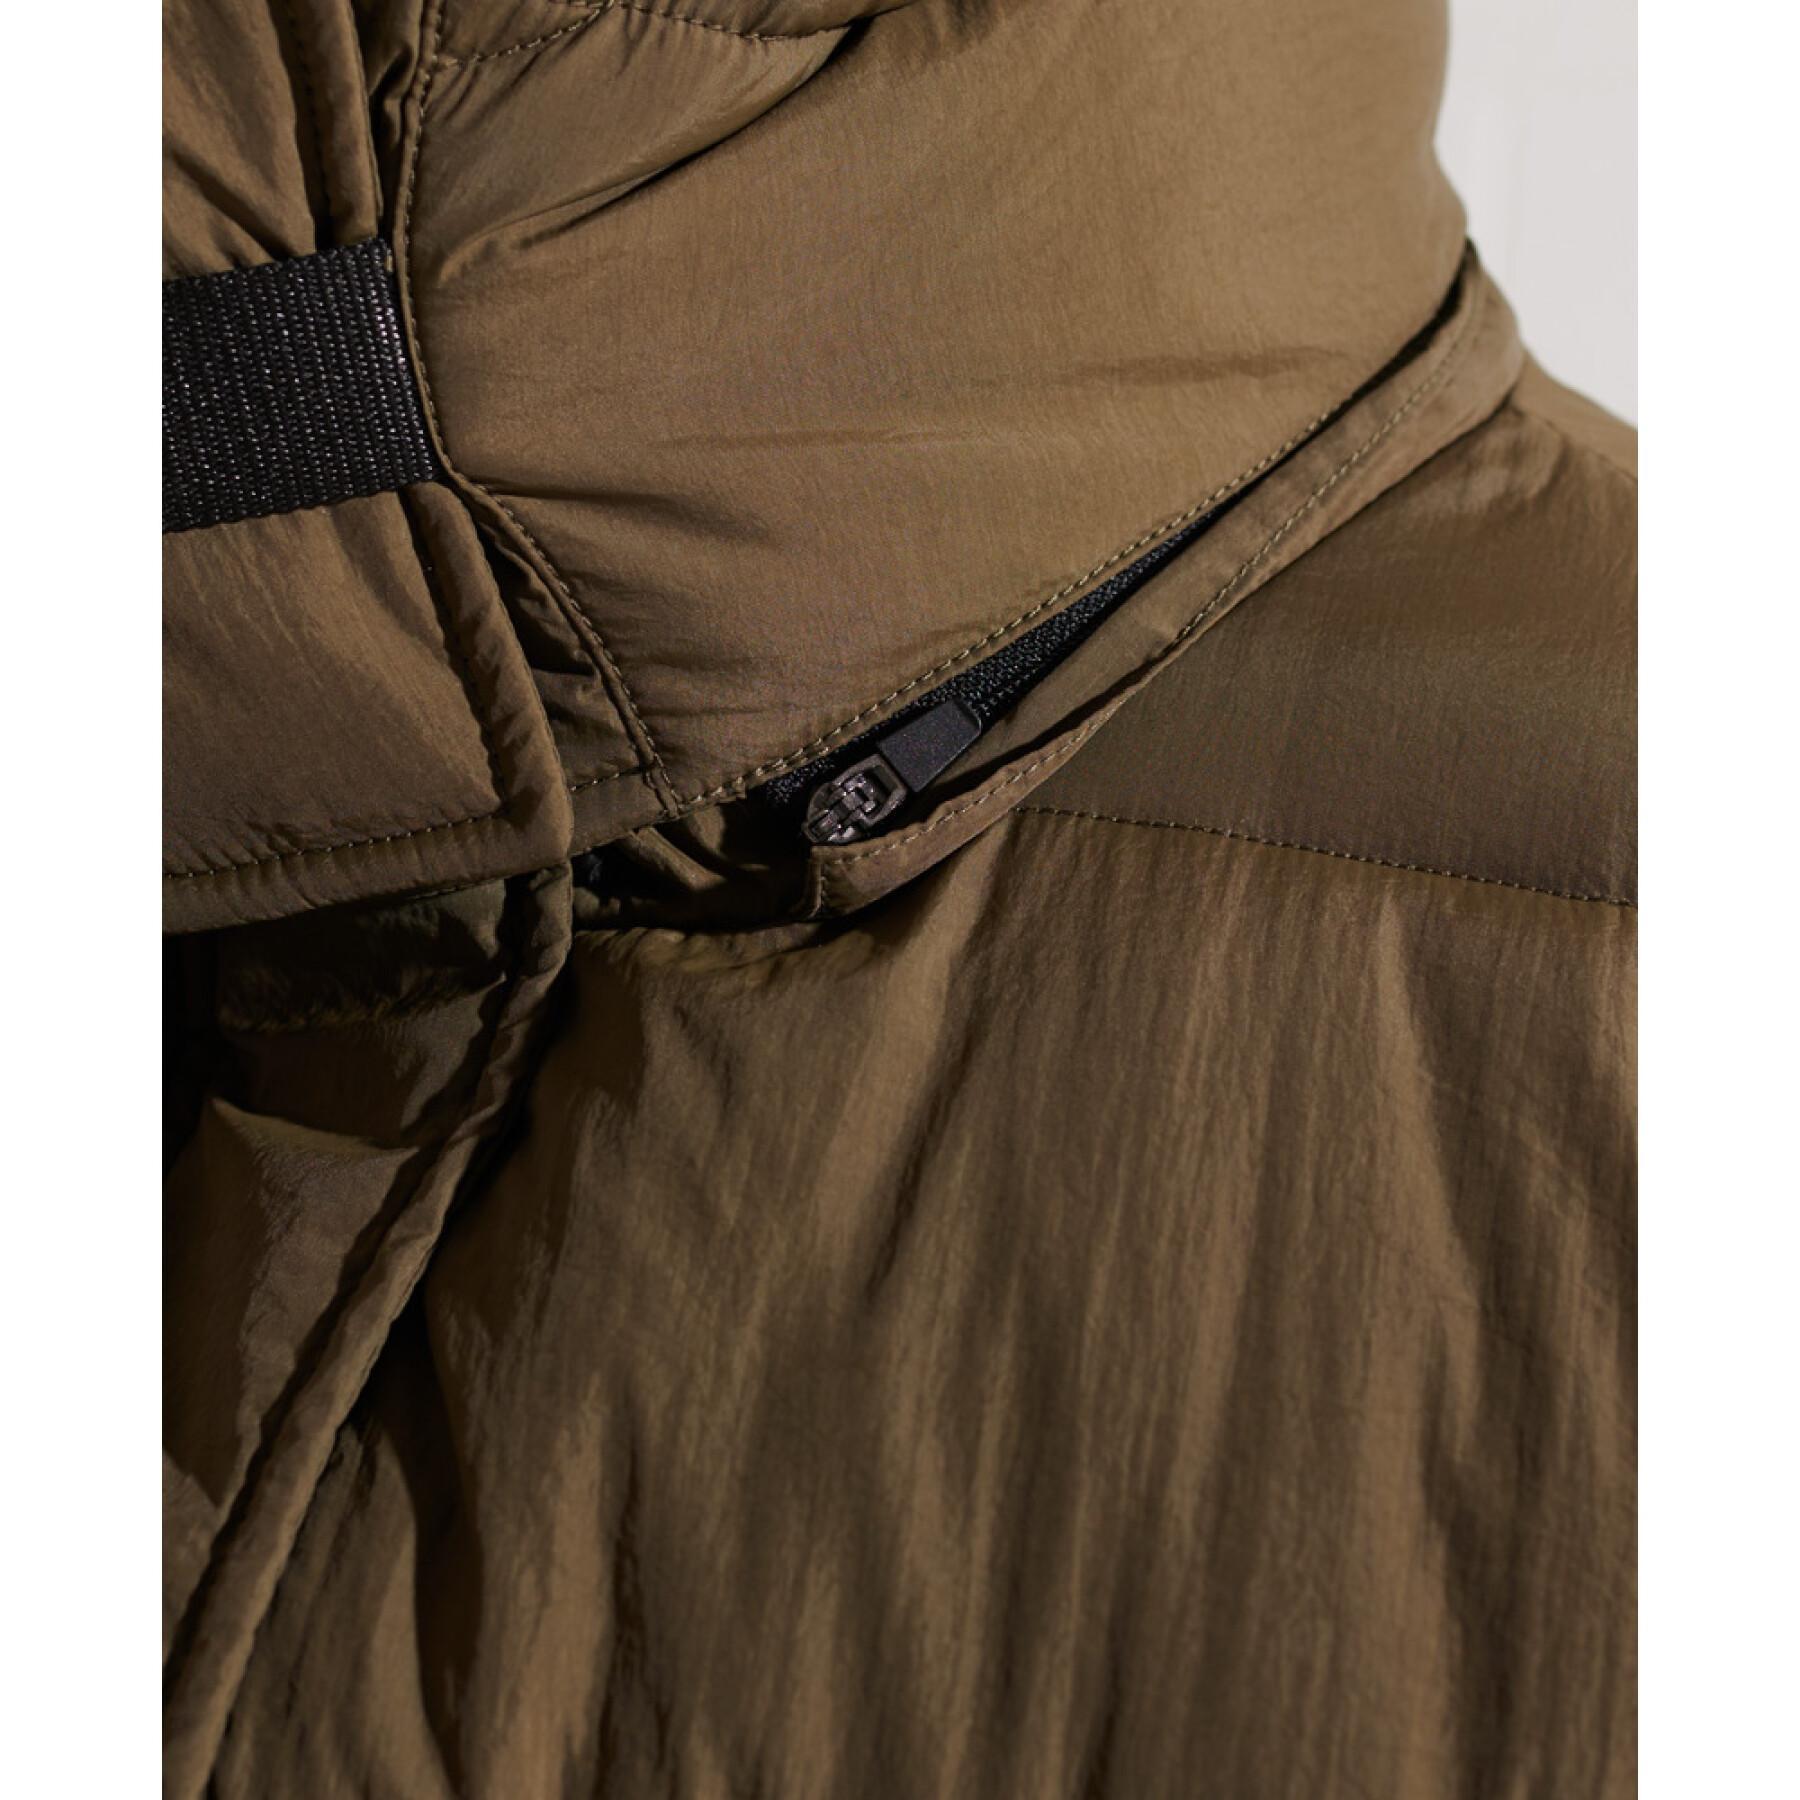 Parka femme Superdry Expedition Cocoon